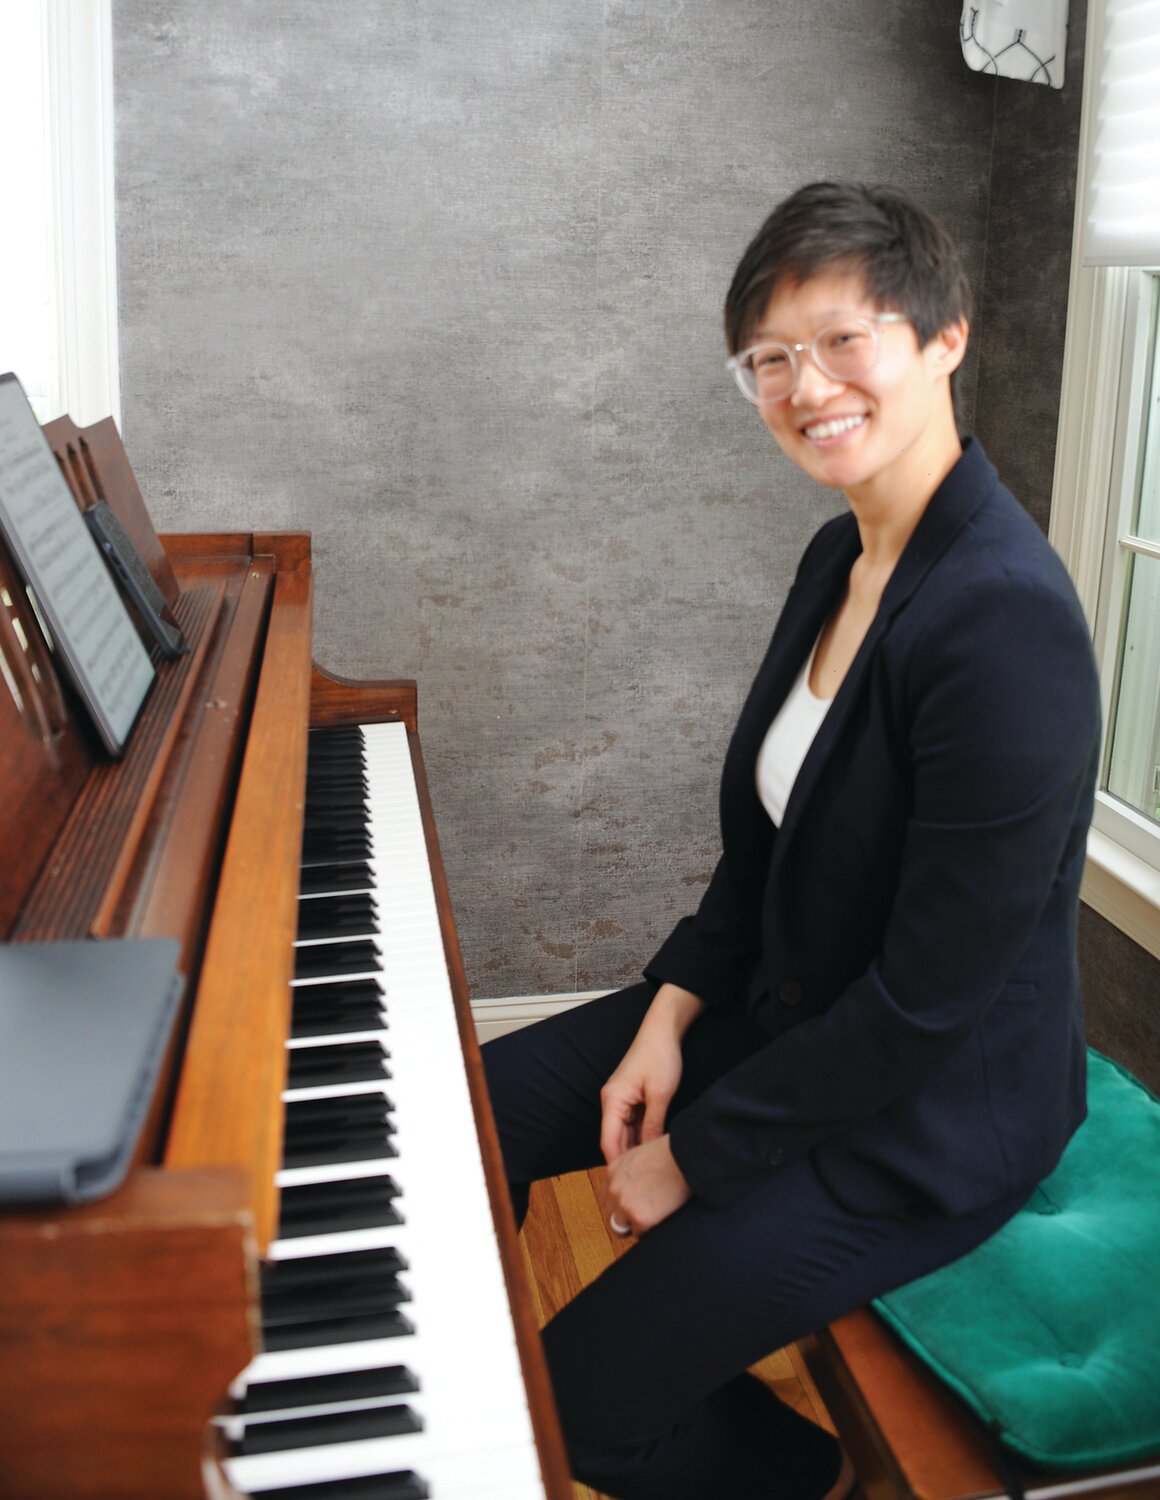 Pianist Ting Ting Wong served as accompanist for the opera singers who performed at the home of Barbara Donnelly Bentivoglio.